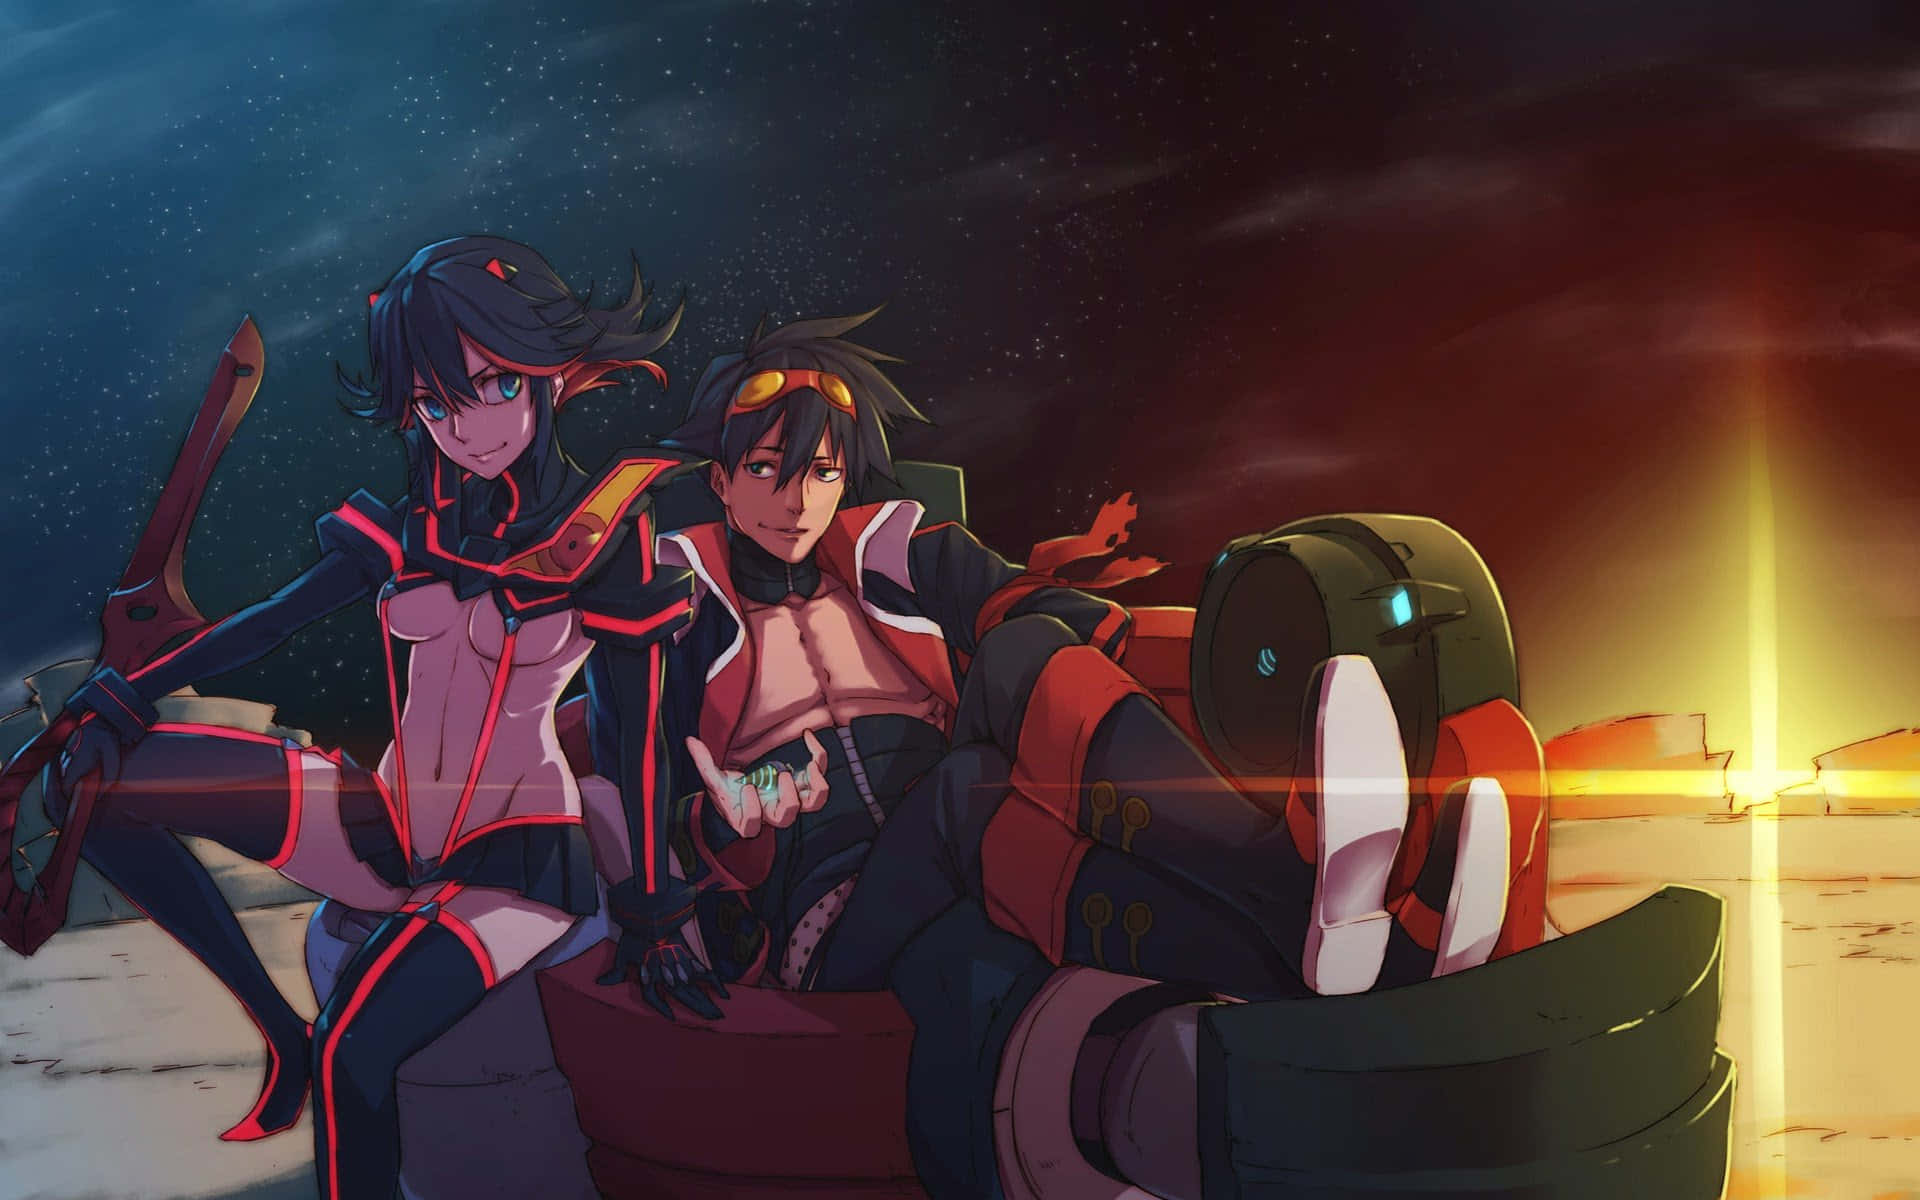 Two Anime Characters Sitting On A Rocket